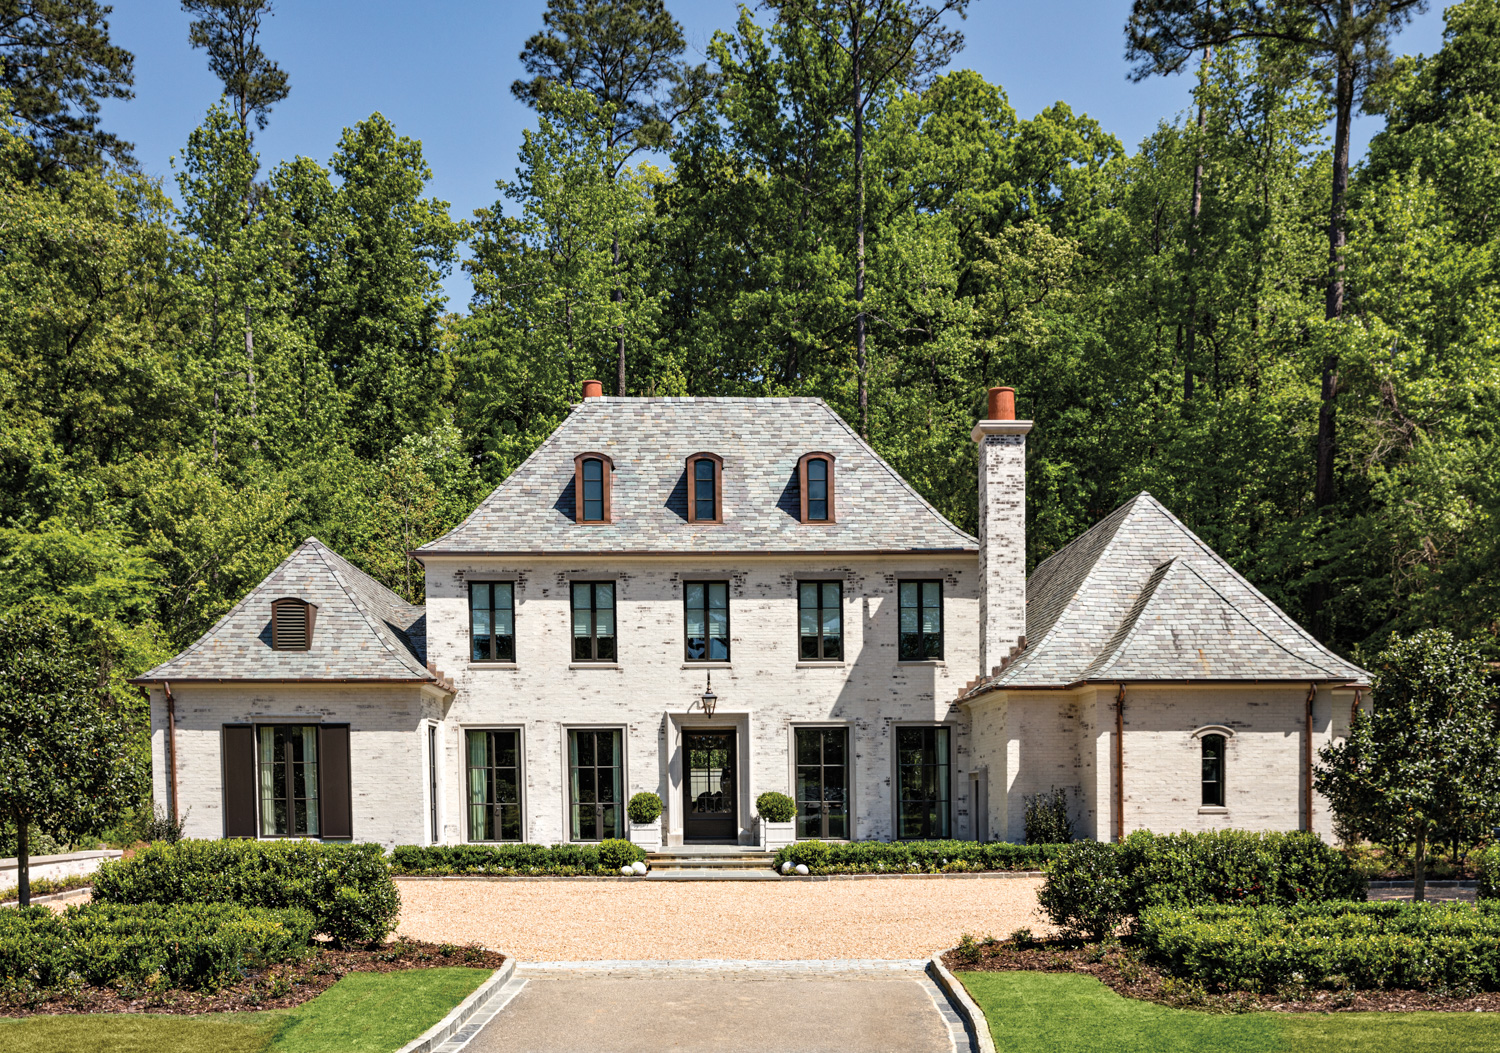 A formal and symmetrical French provincial-inspired residence with expansive motor court